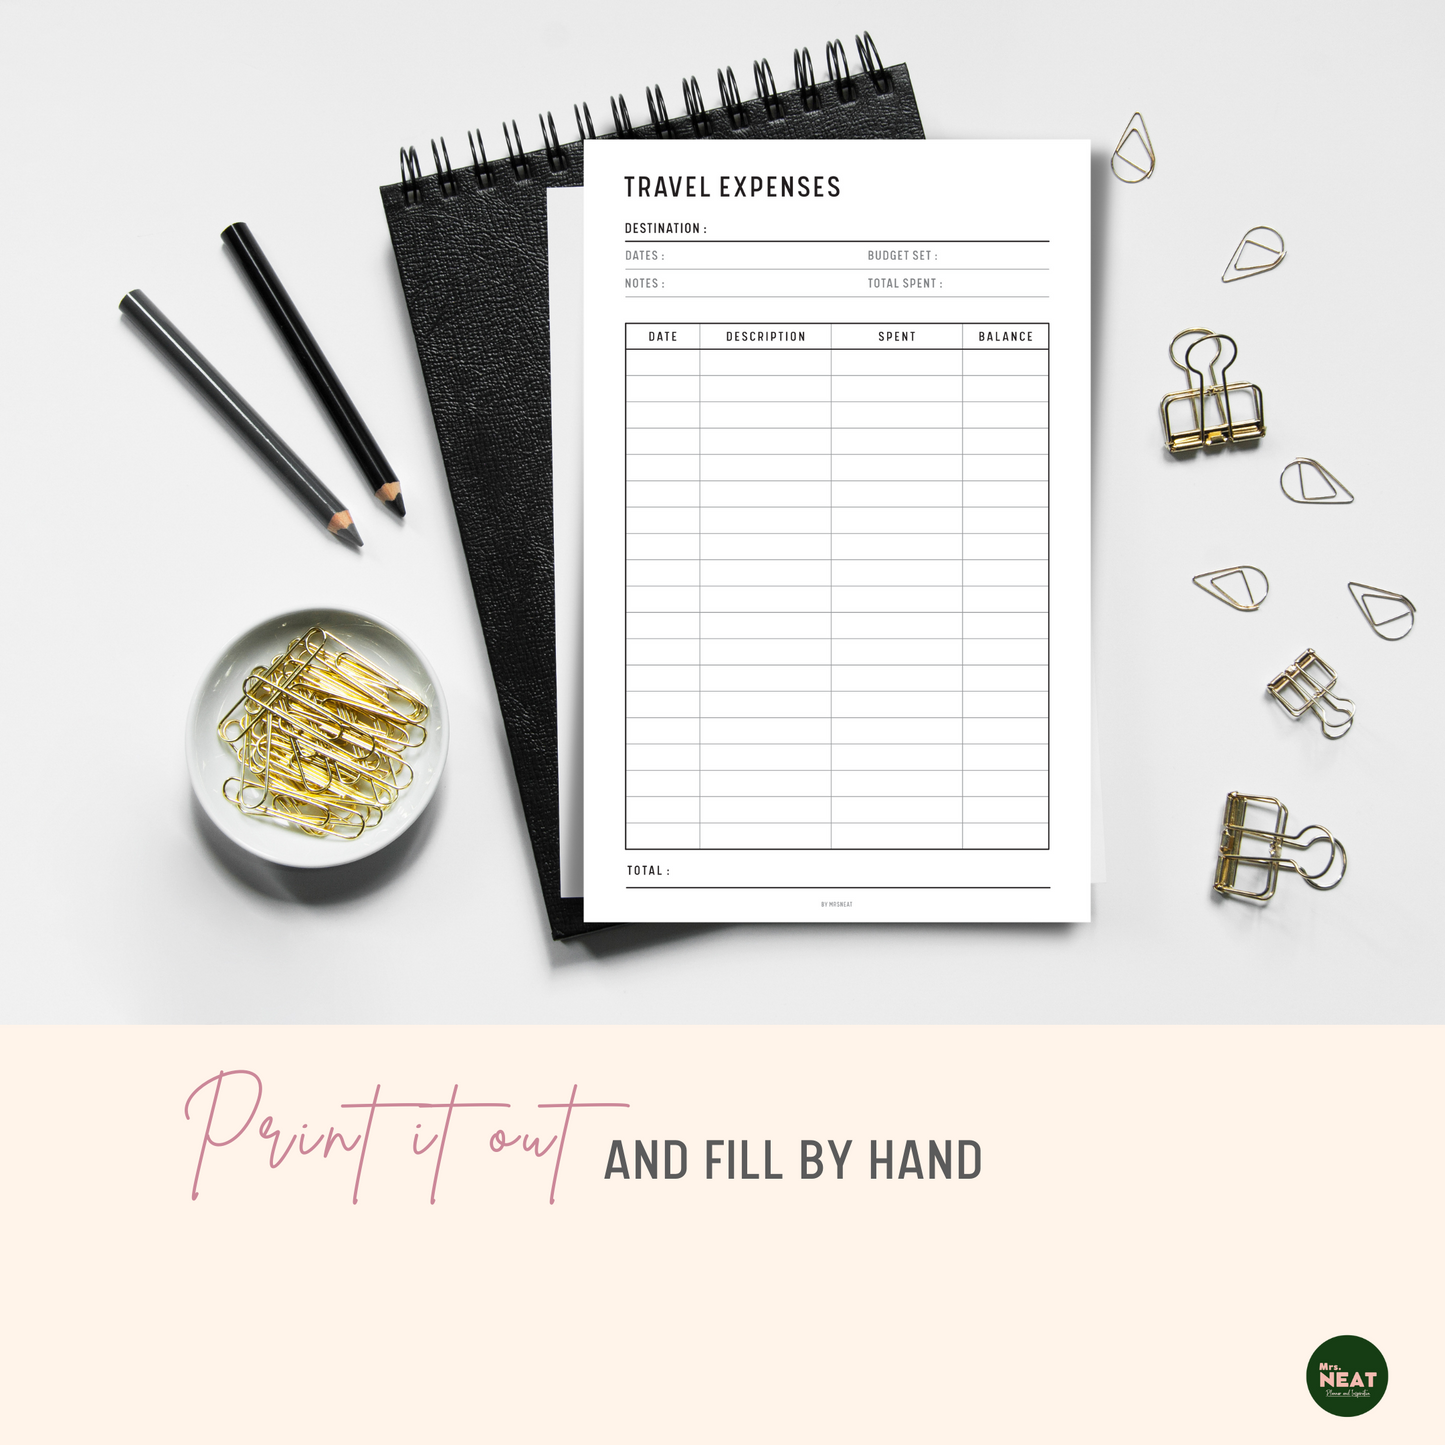 Travel Expenses Tracker Planner Printable printed out on the paper with stationery surround